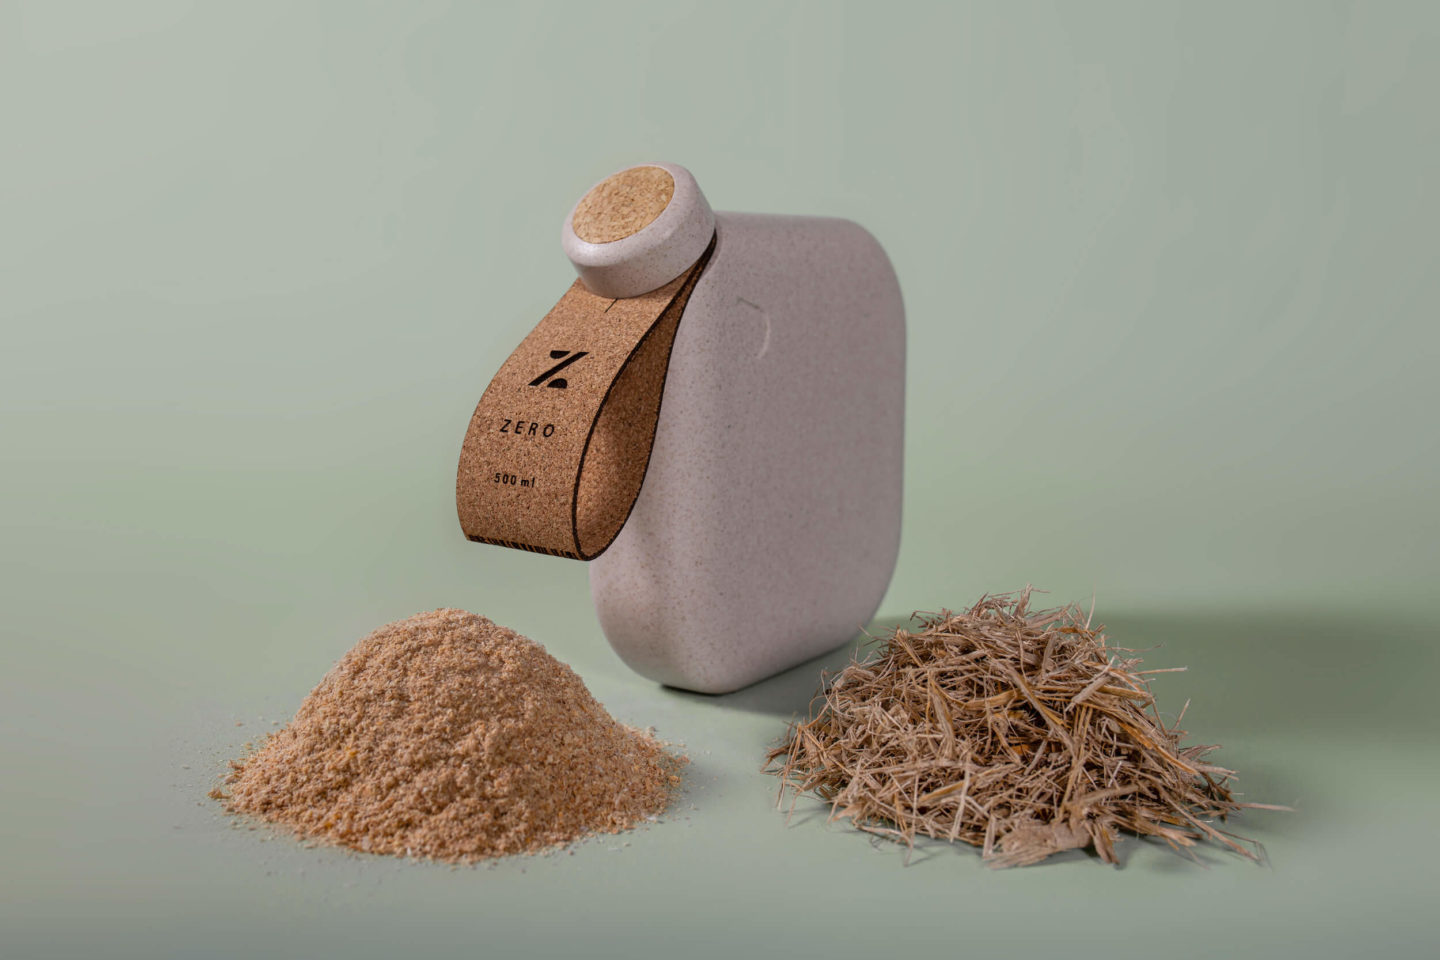 A square water bottle made from sustainable materials, shown alongside the raw materials it is made of